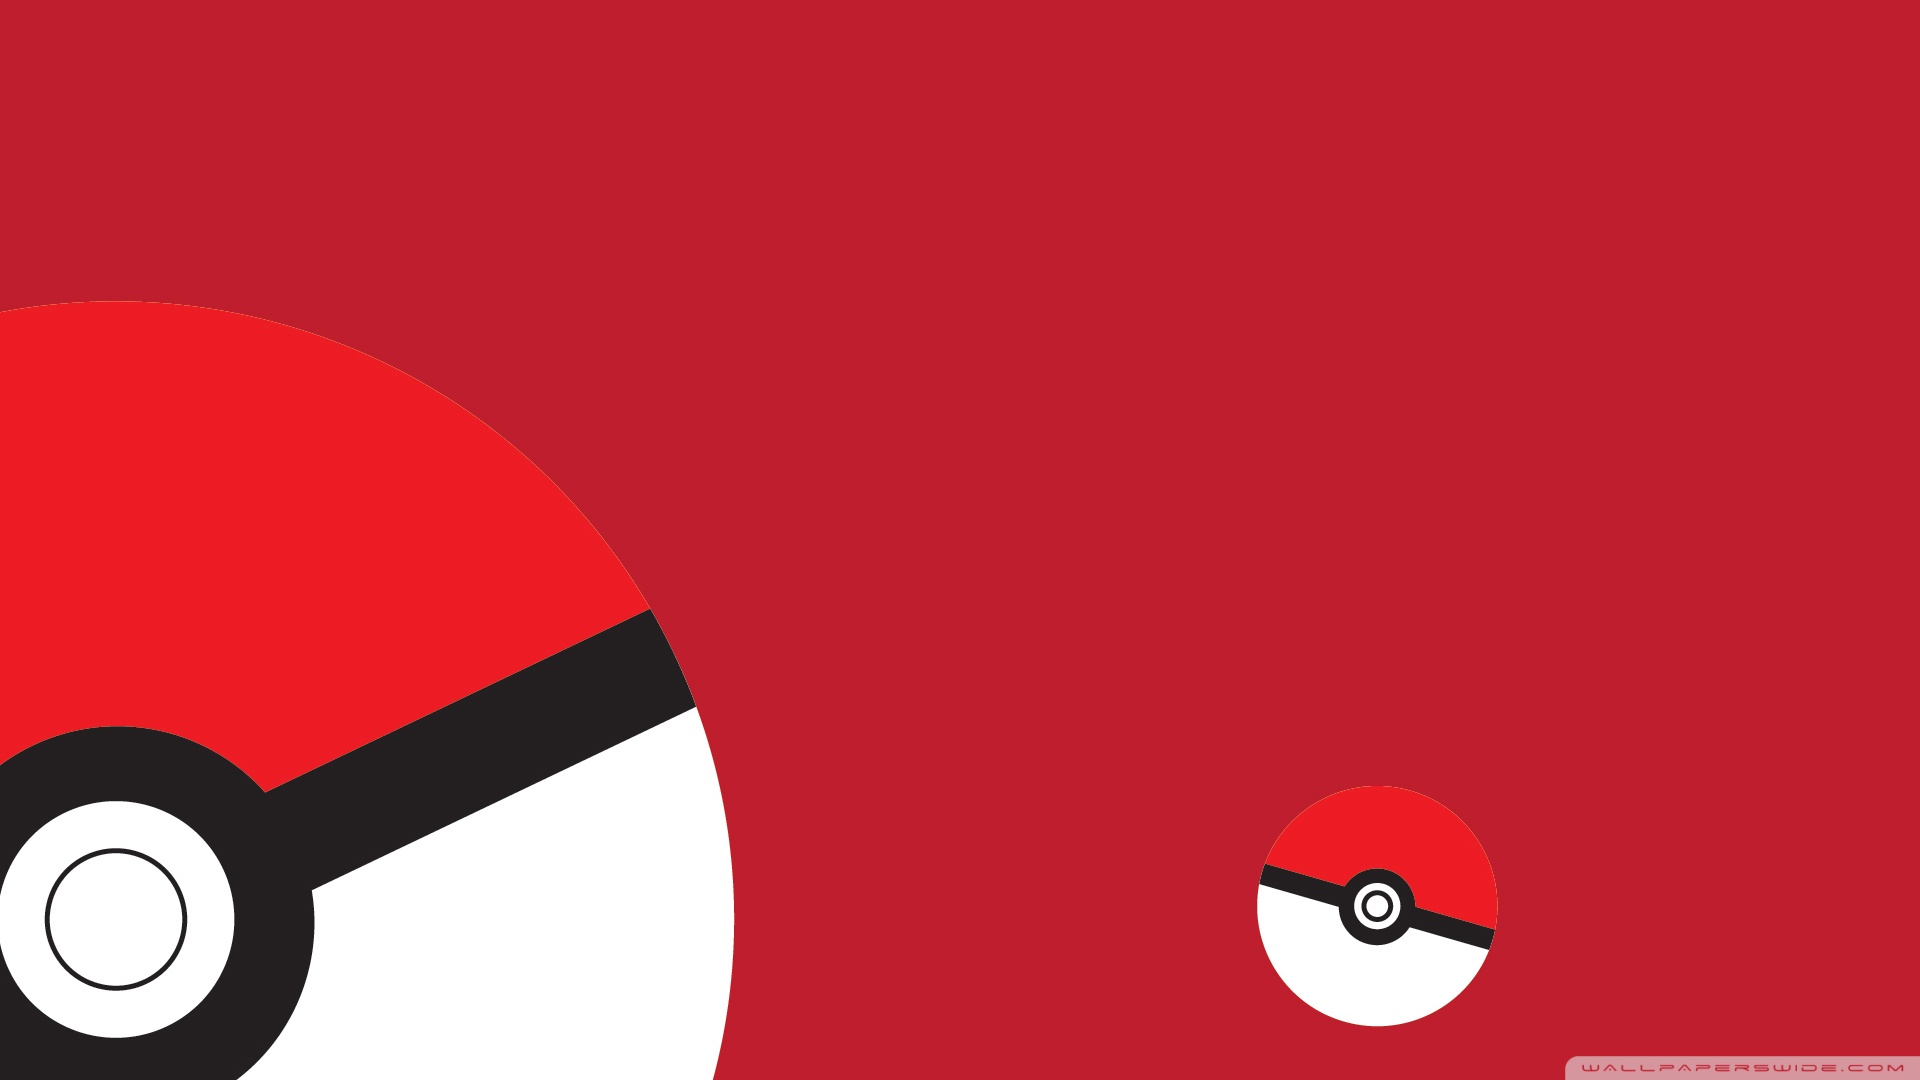 Free Download Red Wallpaper Pokeball Pokemon Images 1920x1080 1920x1080 For Your Desktop Mobile Tablet Explore 74 Red Pokemon Wallpaper Pokemon Trainer Red Wallpaper Pokemon Legendary Wallpaper Red Anime Wallpaper - pokemon trainer red roblox